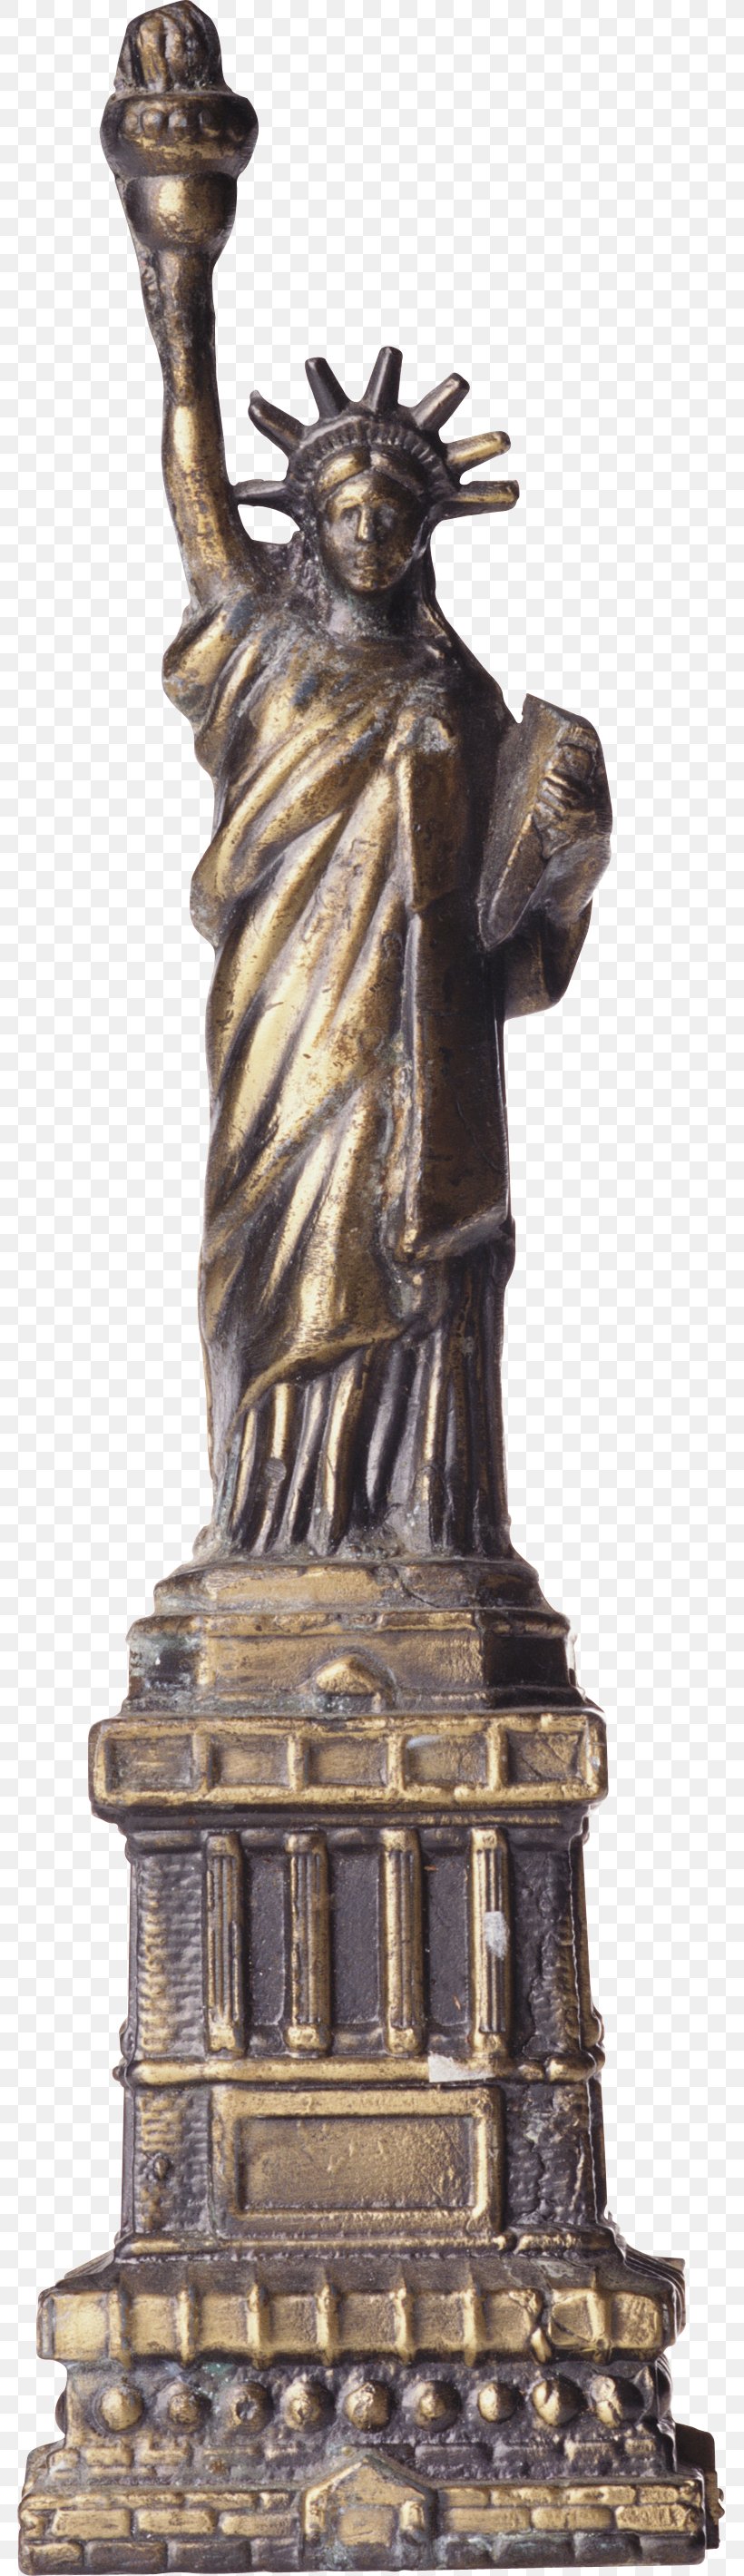 Statue Of Liberty Bronze Sculpture Figurine, PNG, 781x2839px, Statue Of Liberty, Ancient History, Antique, Brass, Bronze Download Free